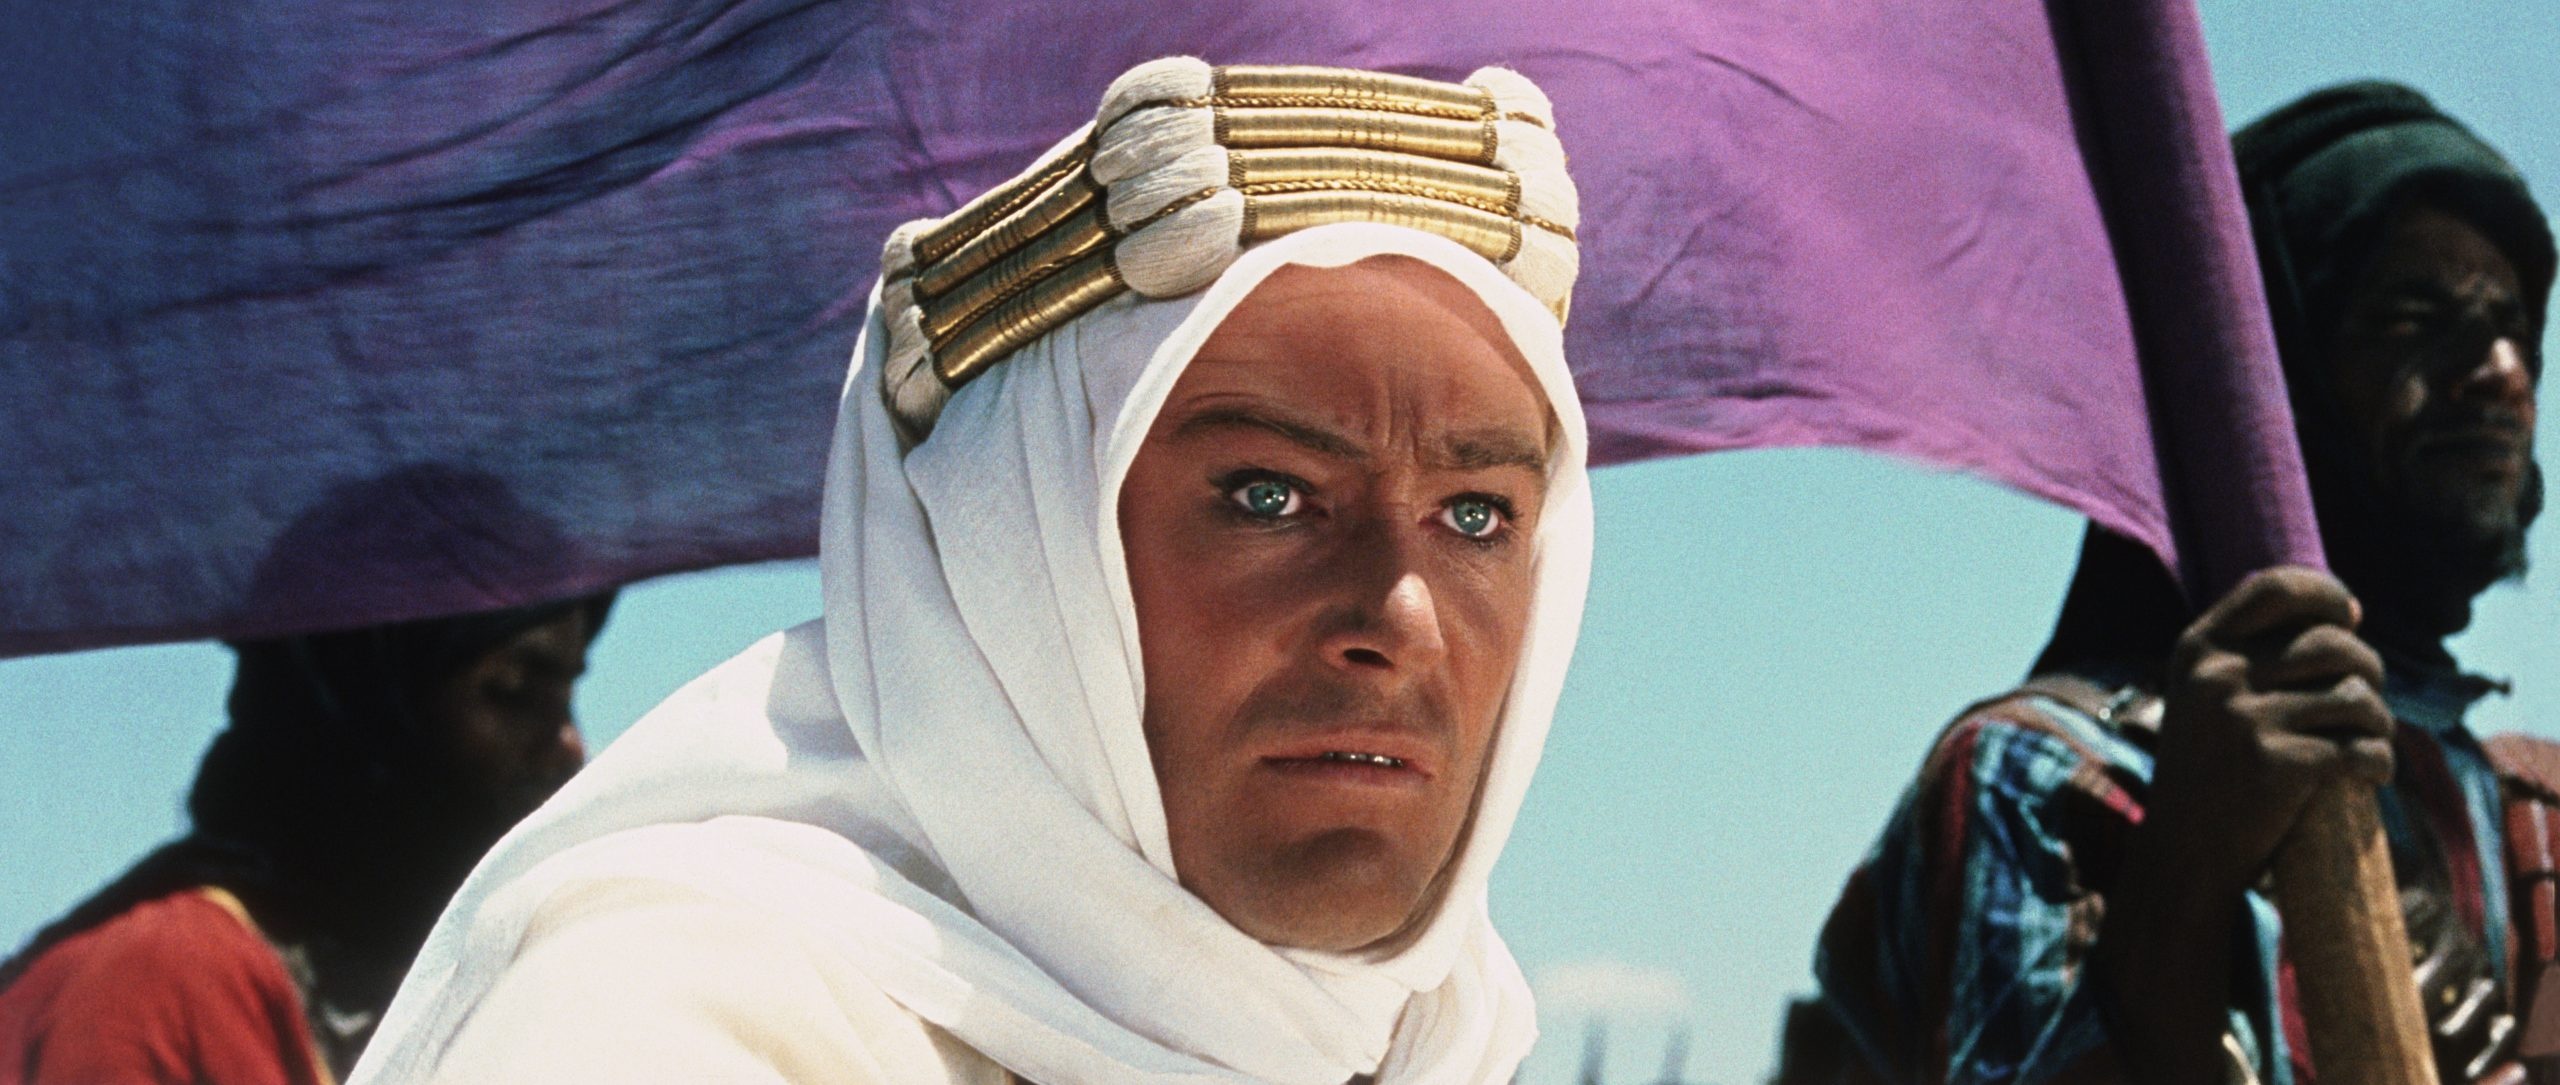 Lawrence of Arabia: One of the most prolific of the British attackers, A young army officer. 2560x1090 Dual Screen Wallpaper.